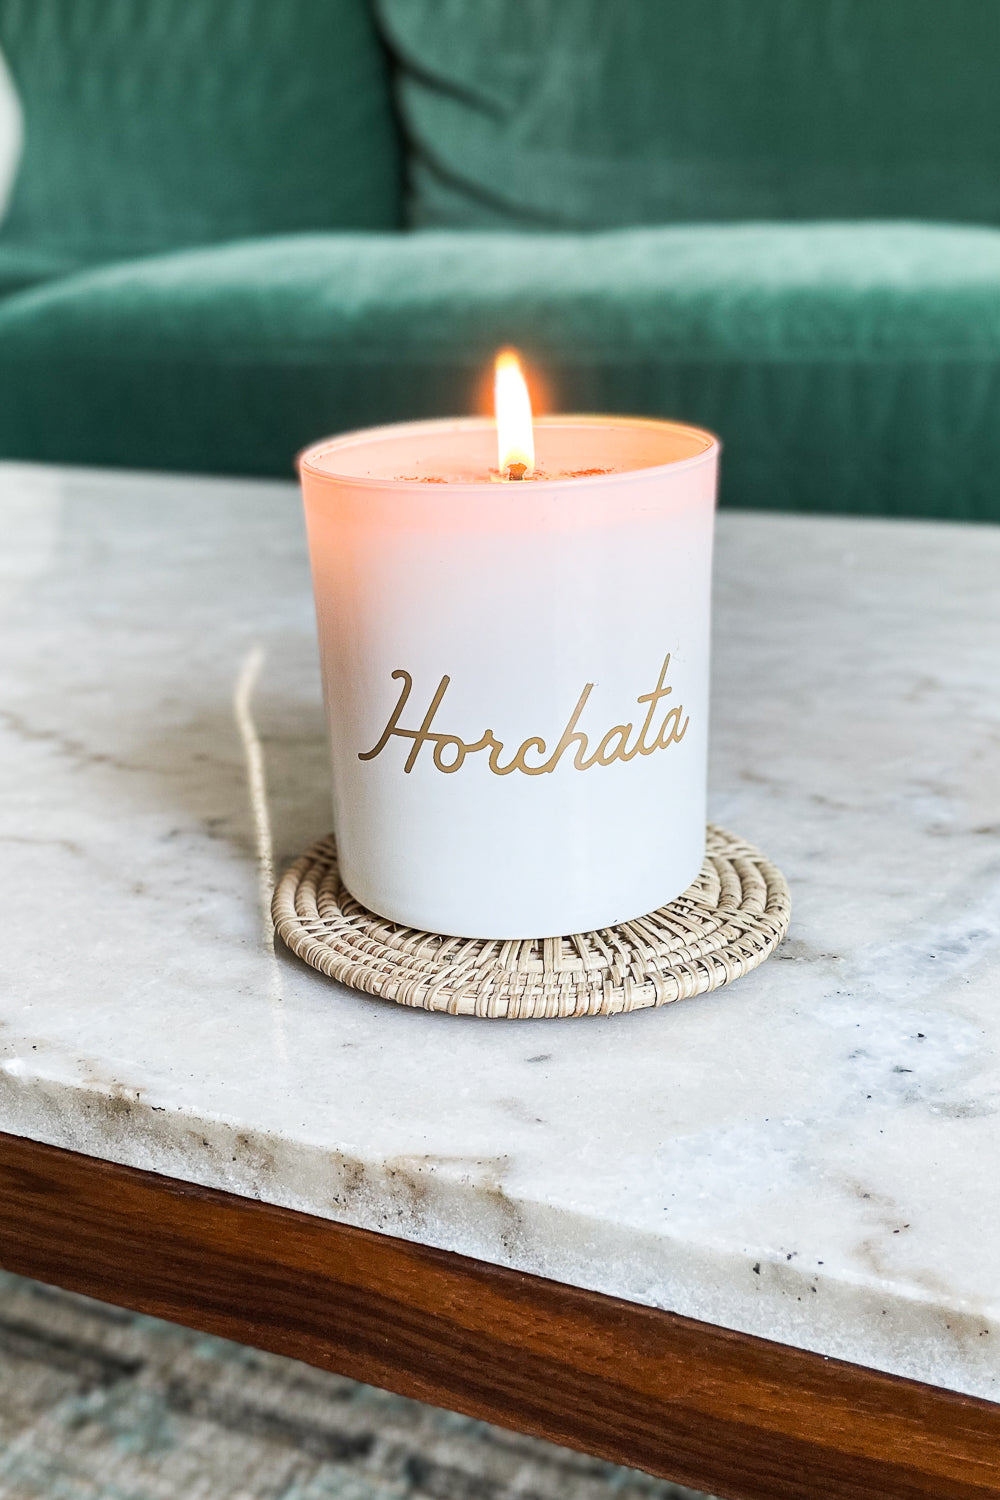 SIN-MIN Horchata Candle (10oz)